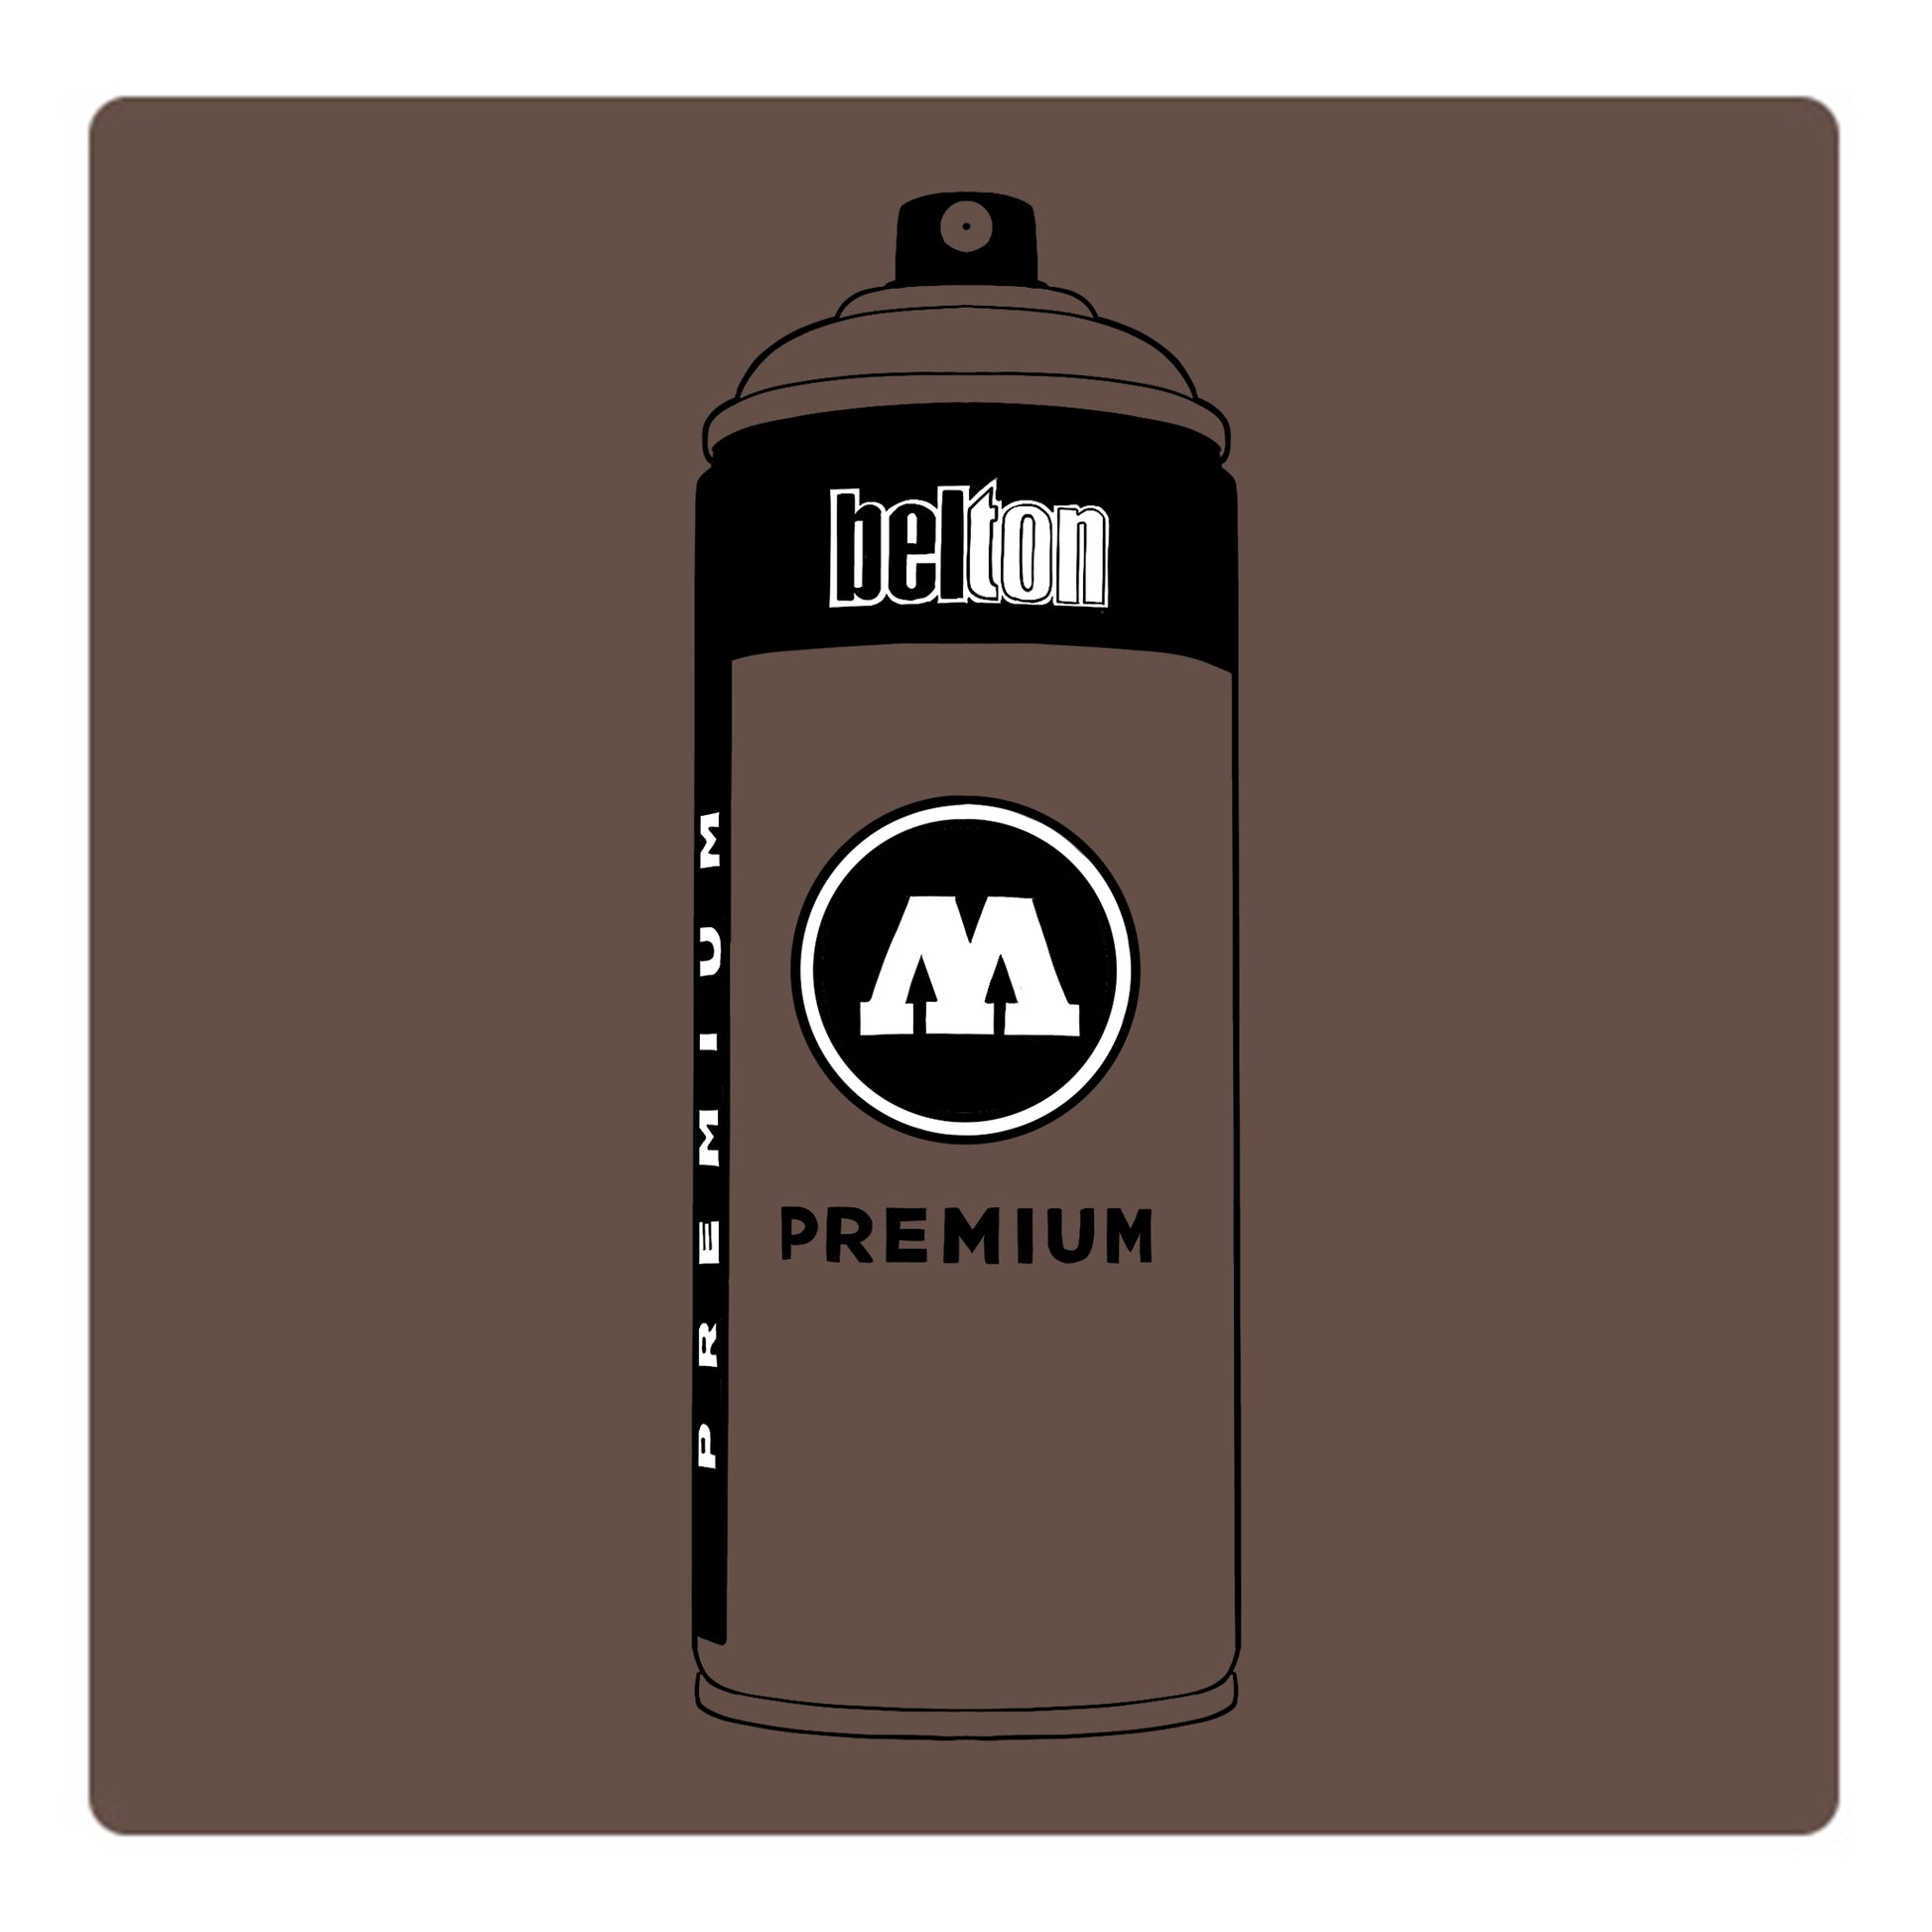 A black outline drawing of a taupe brown spray paint can with the words "belton","premium" and the letter"M" written on the face in black and white font. The background is a color swatch of the same Taupe brown with a white border